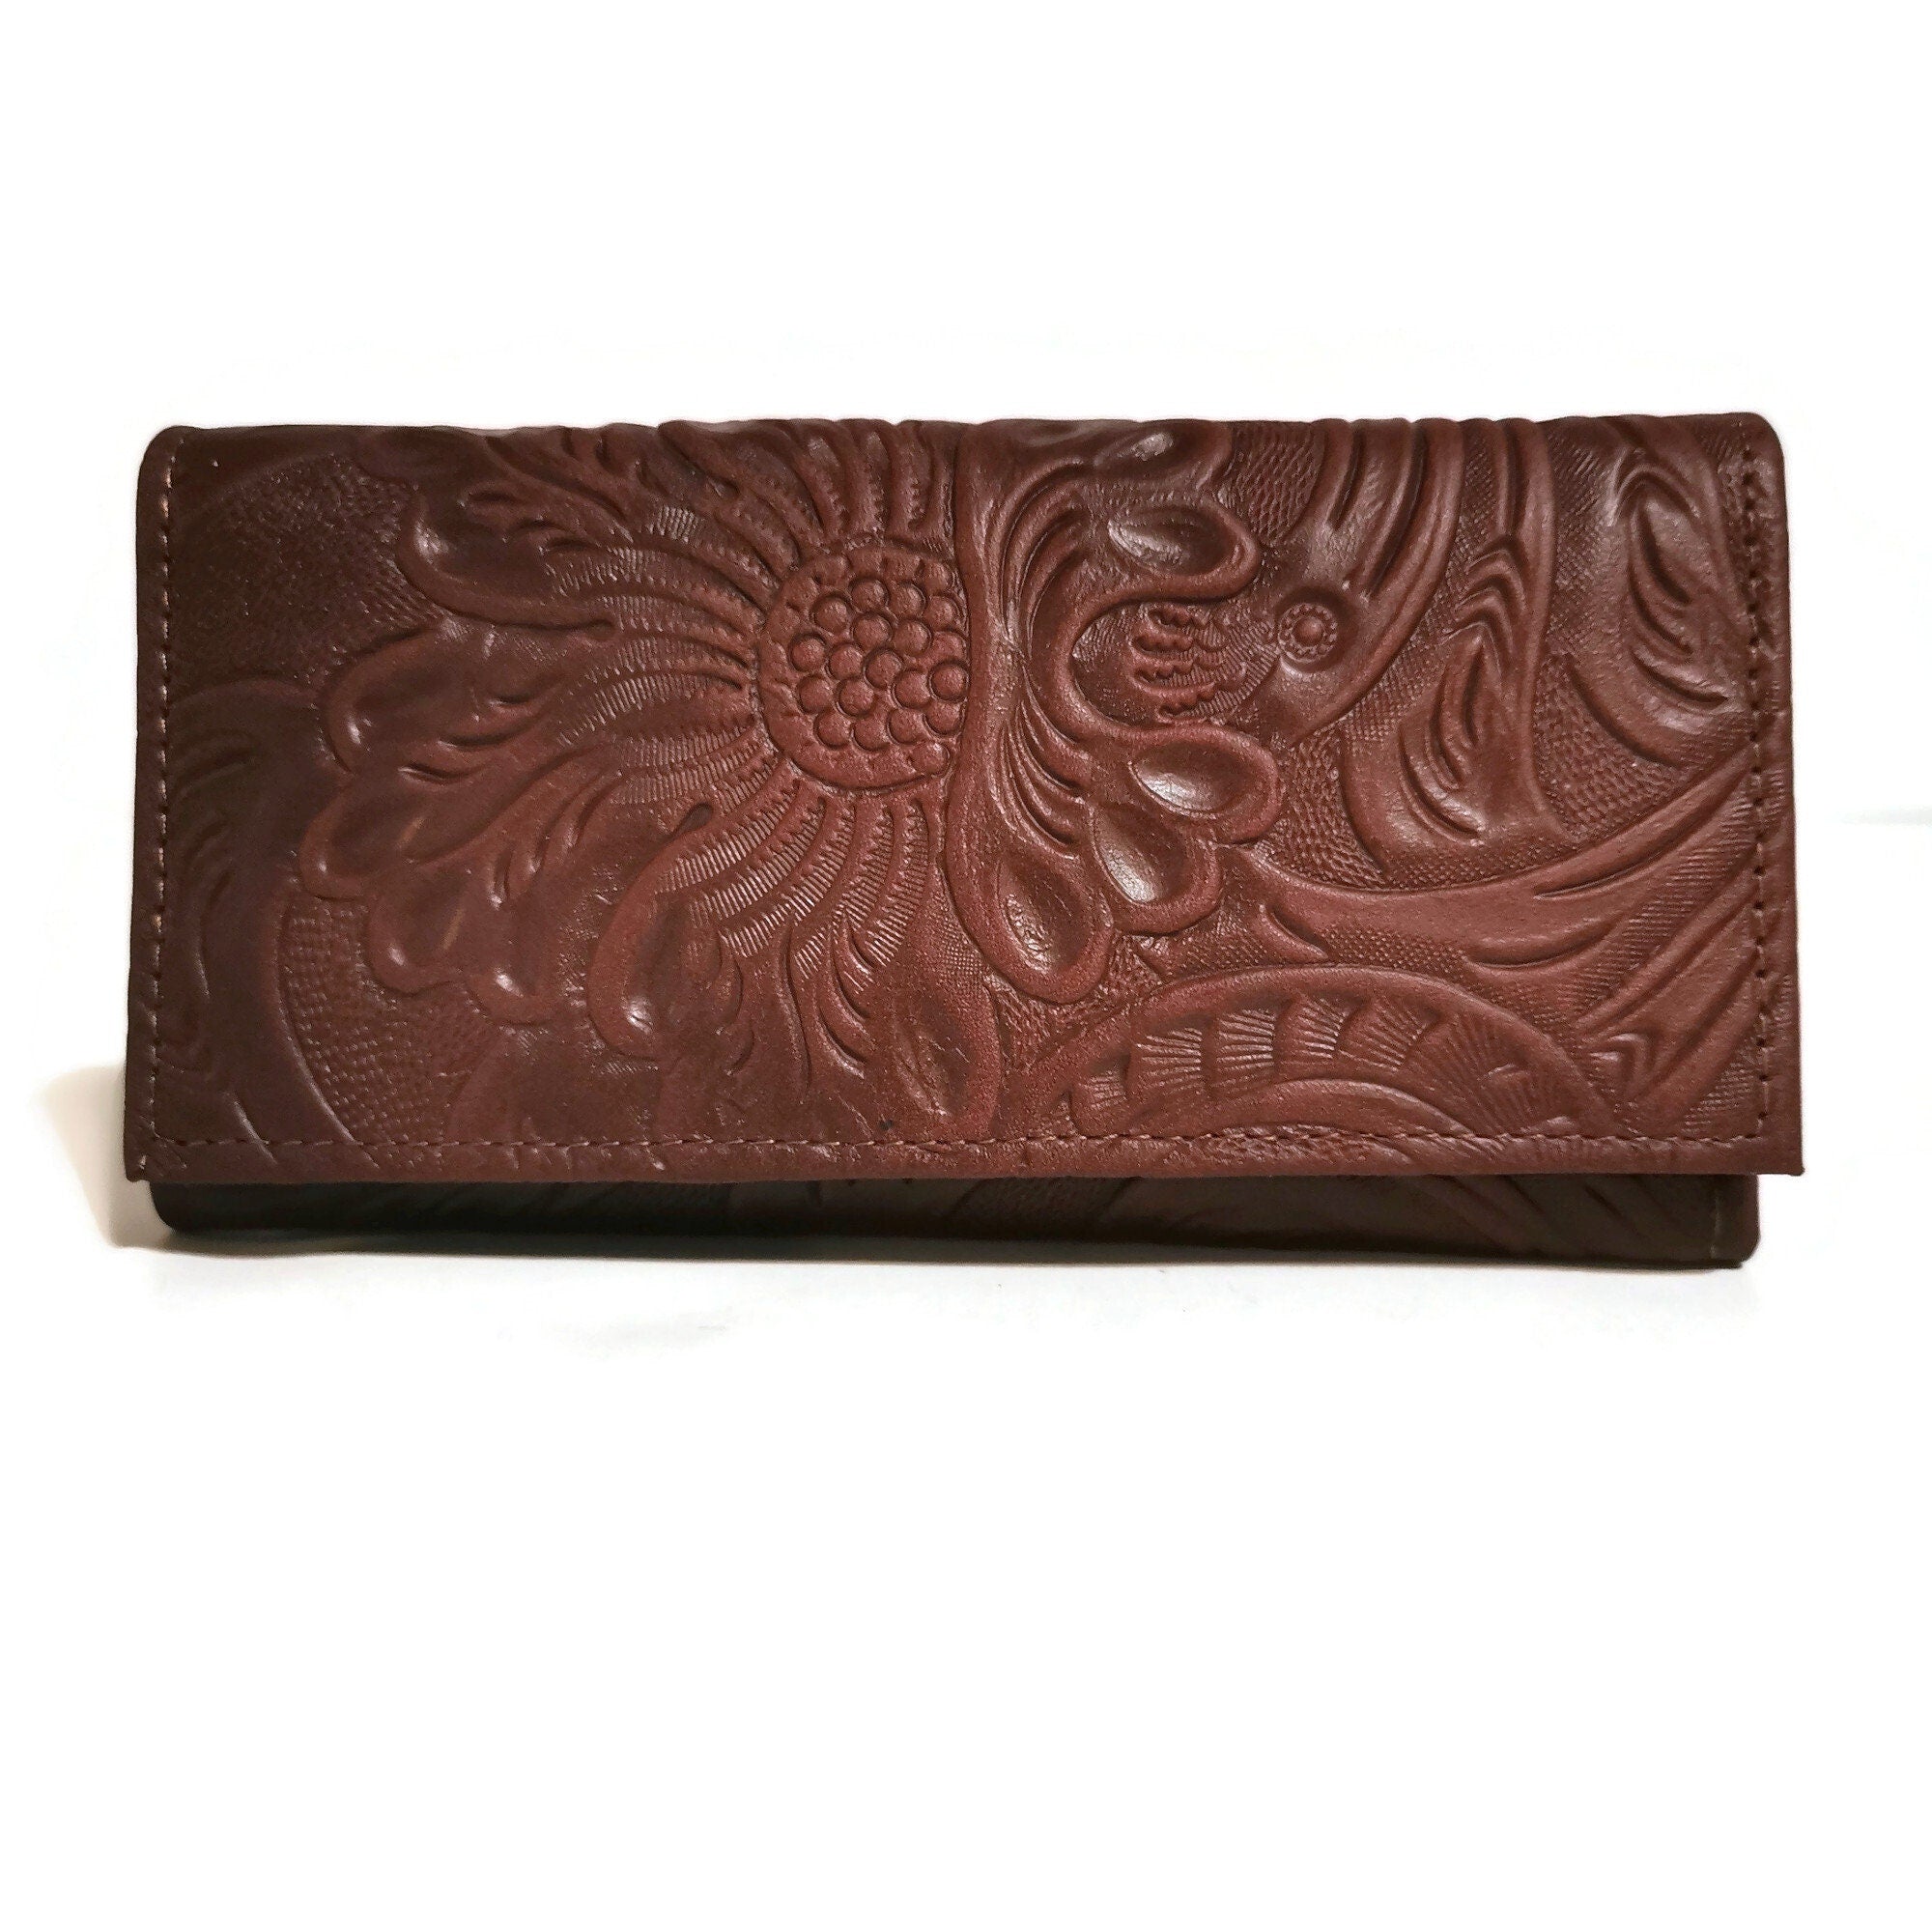 Brown leather wallet for women